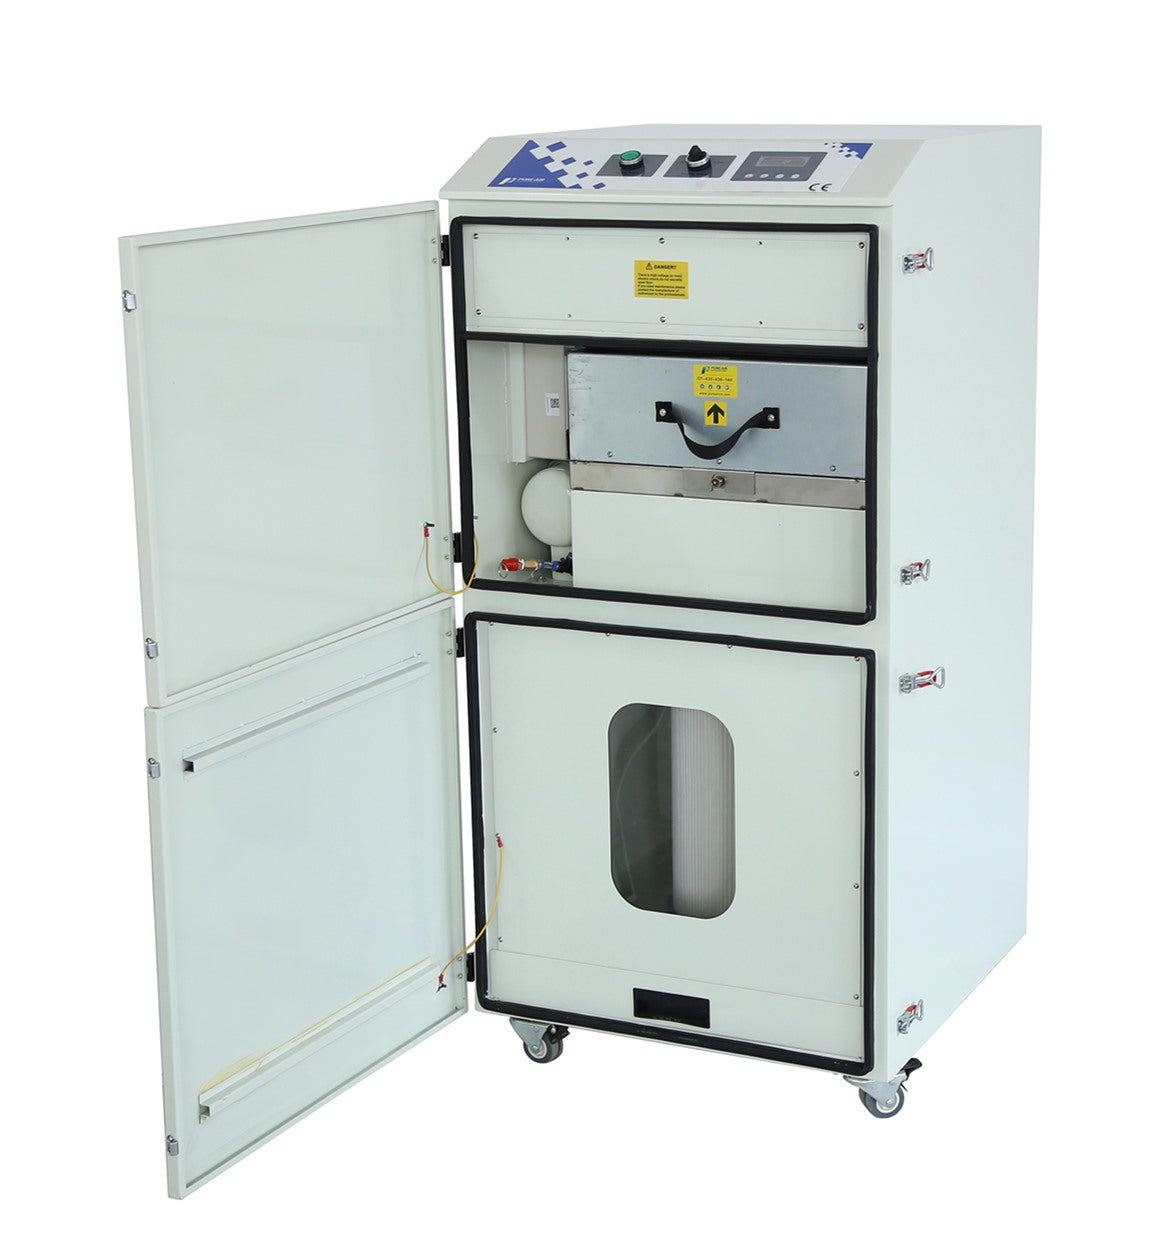 Fume Extraction Units for Co2 Laser Cutters - Cutting Timber and MDF